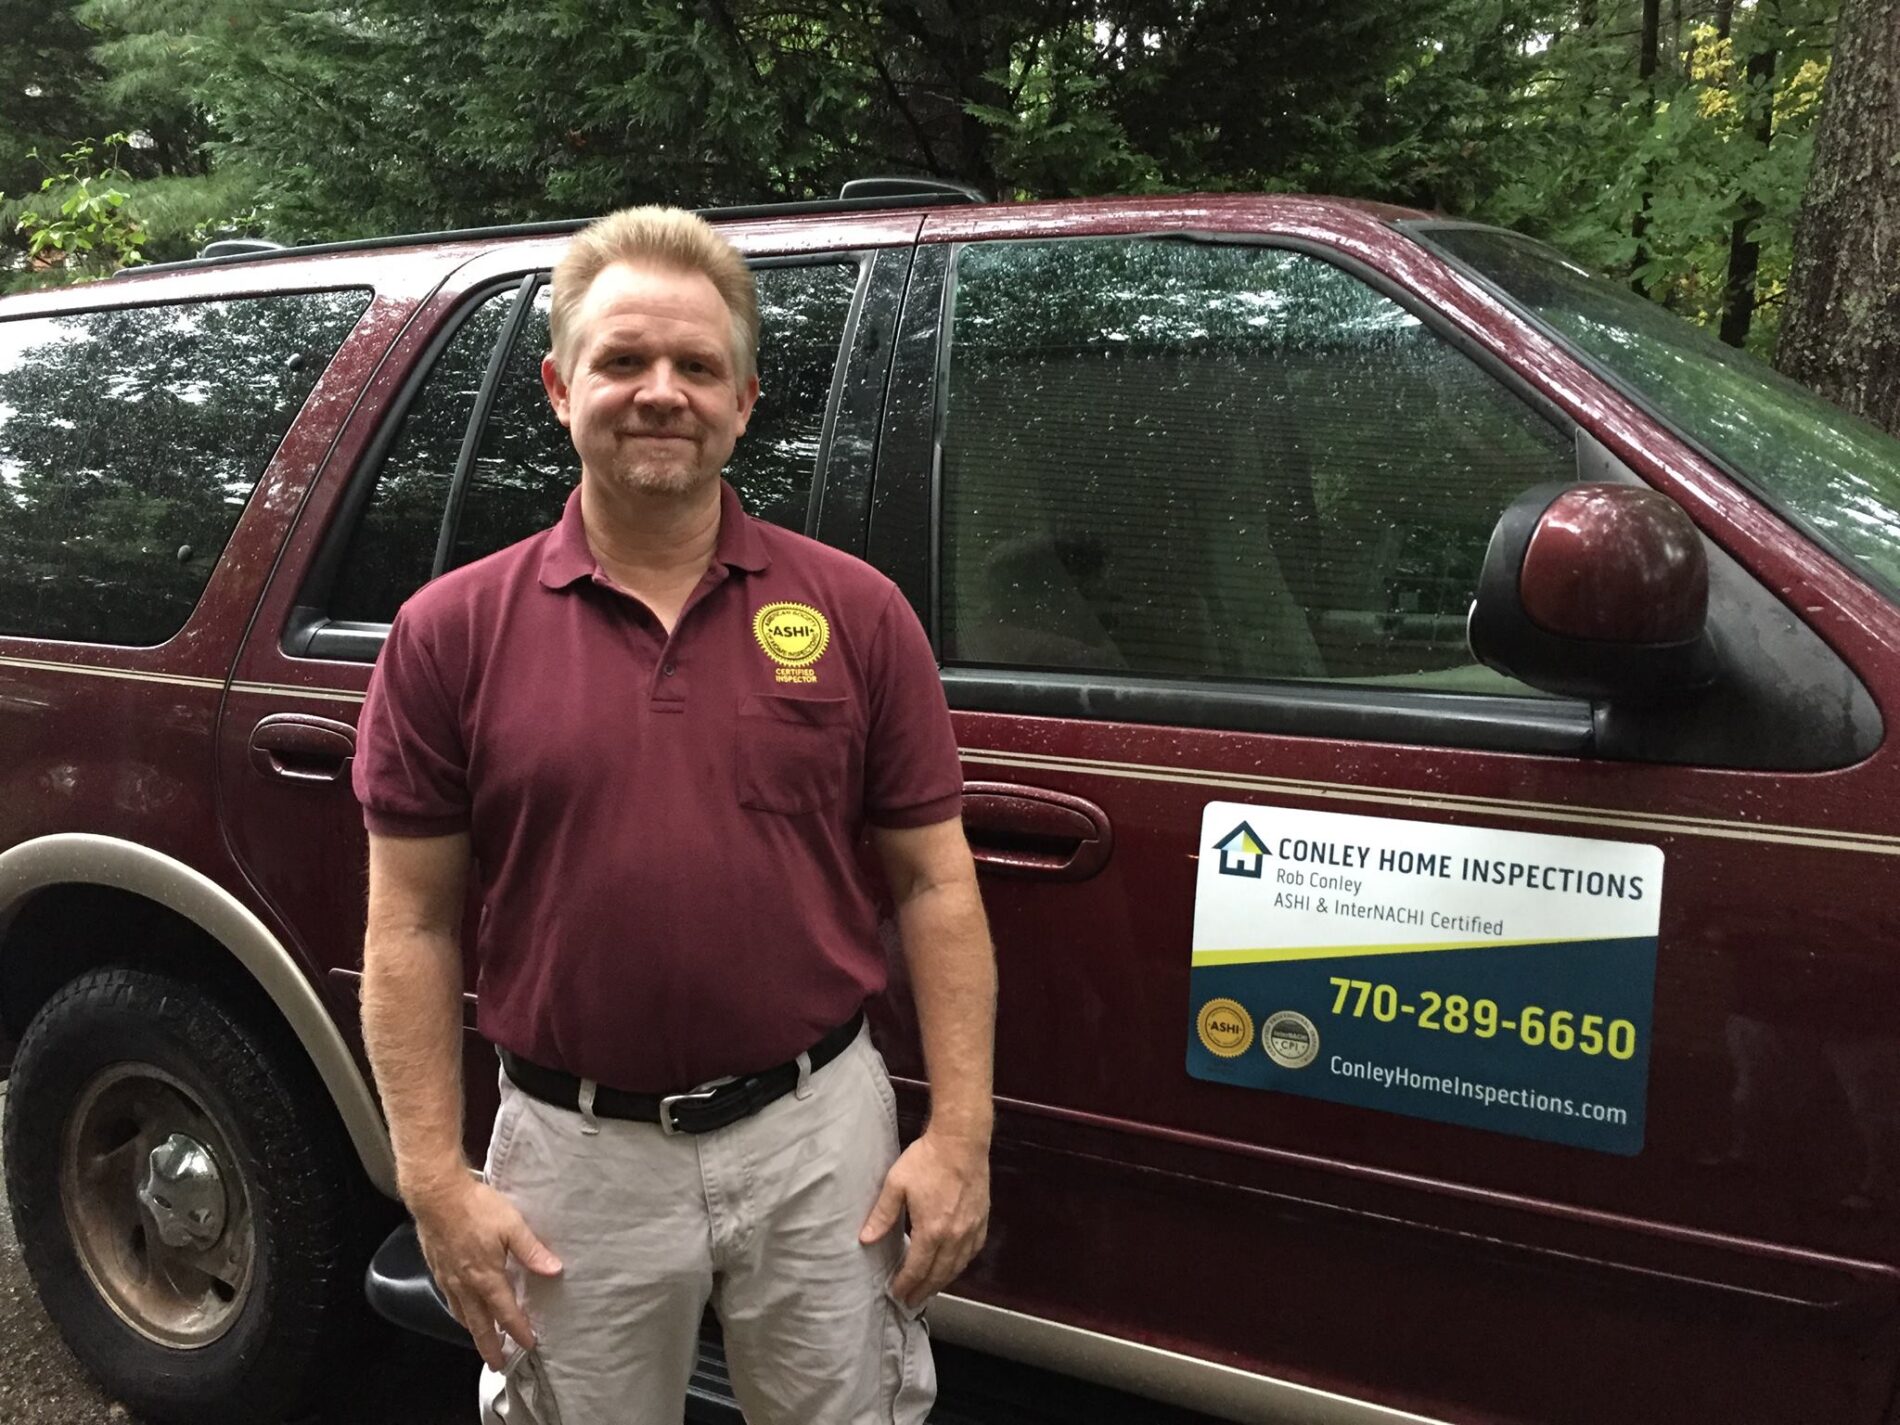 Rob Conley, owner of Conley Home Inspection